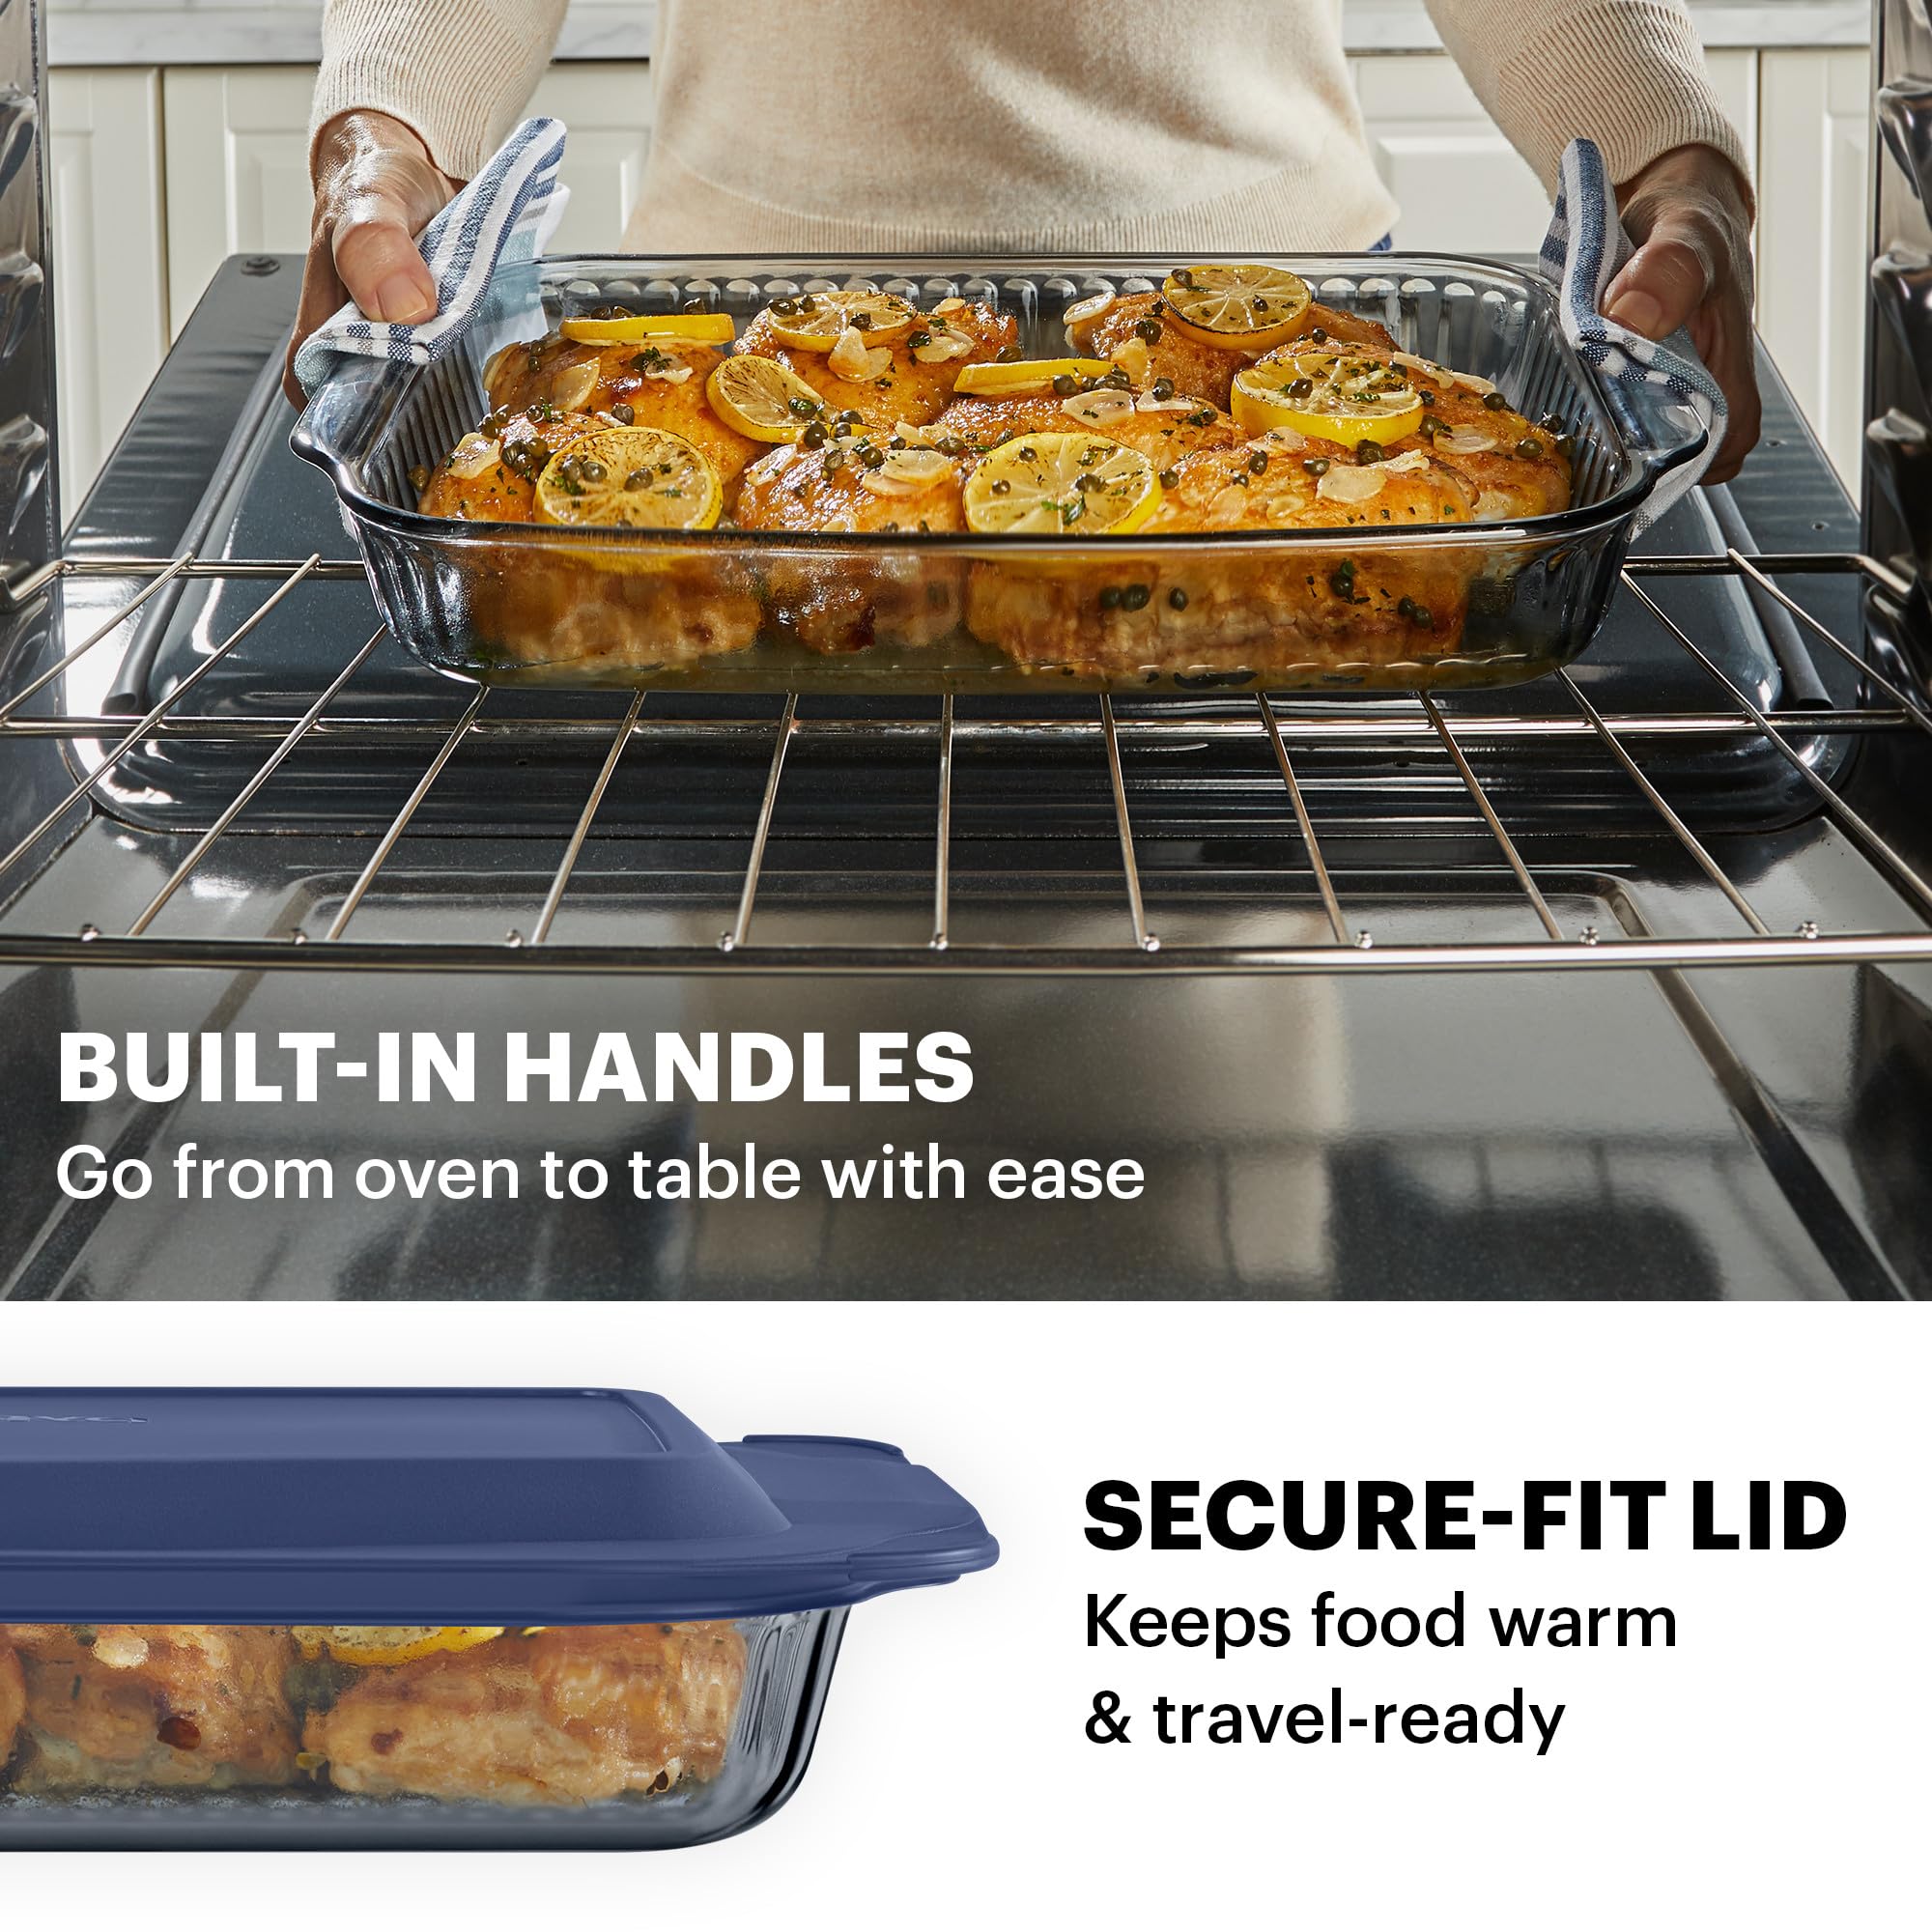 Pyrex Sculpted Tinted (4-PC Full Set) Glass Baking Dish with BPA-Free Lid, Oblong Bakeware Glass Pan For Casserole & Lasagna, Dishwasher, Freezer, Microwave and Pre-Heated Oven Safe, Smoke